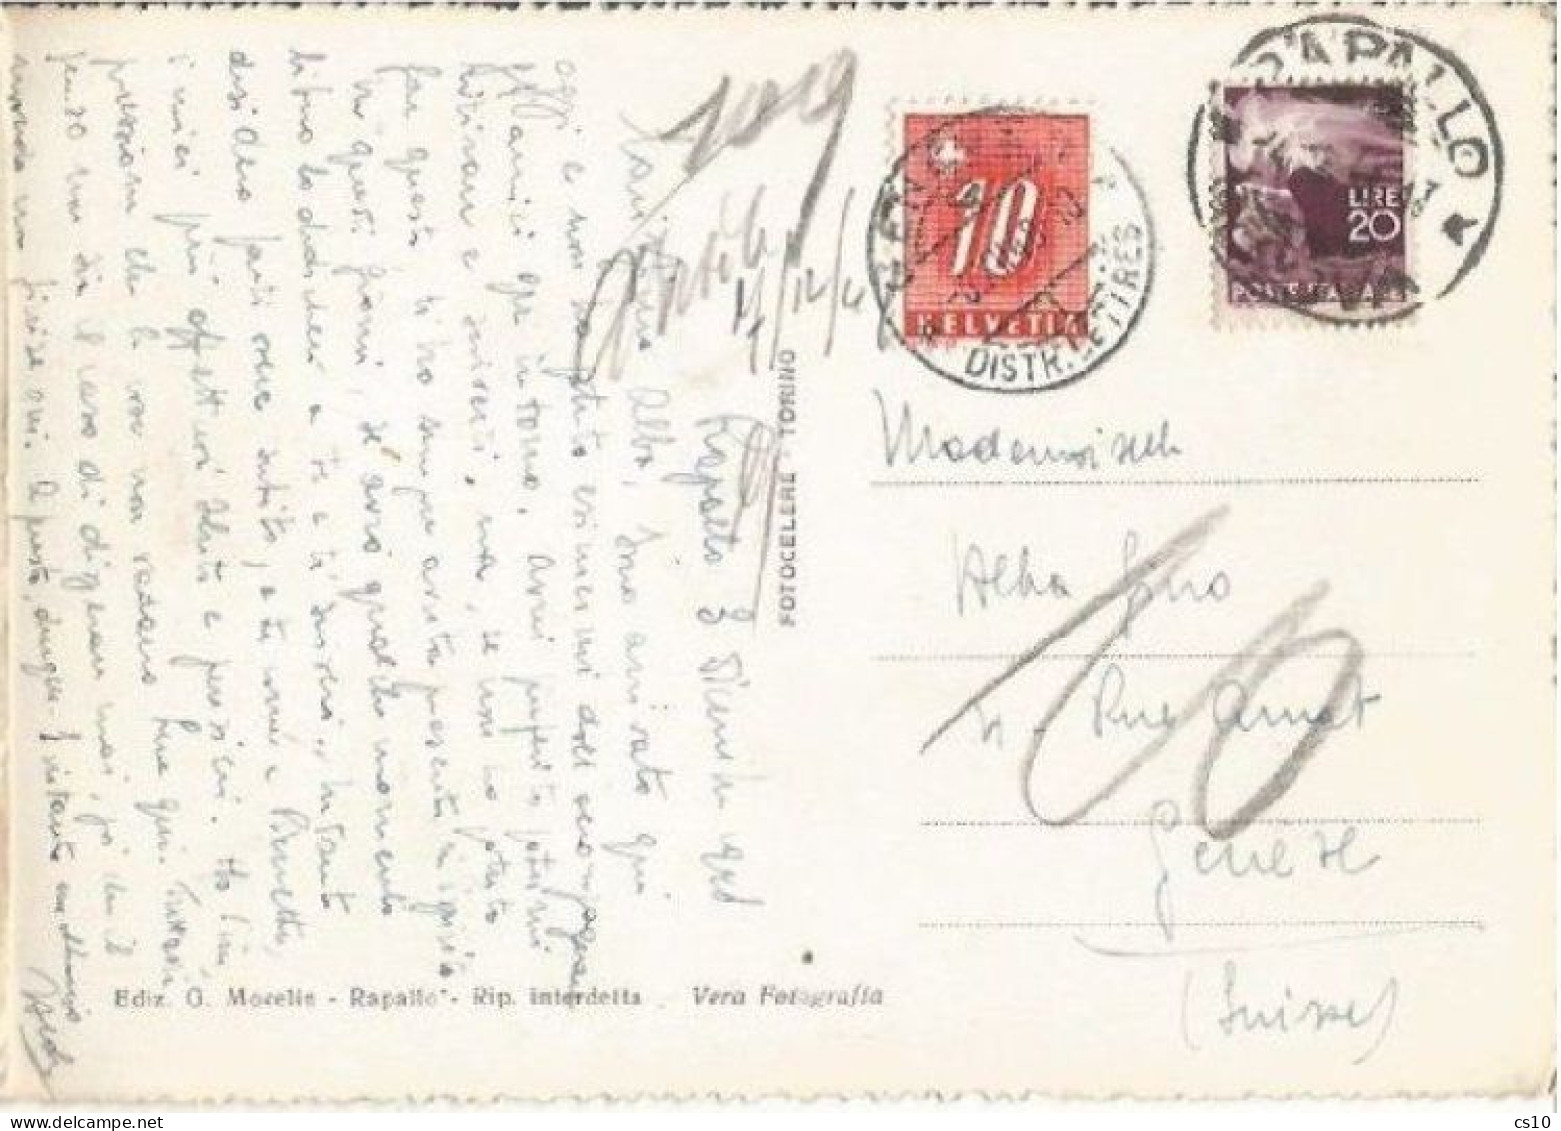 Suisse Postage Due Tax C.10 On Pcard Italy 1948 - Poststempel